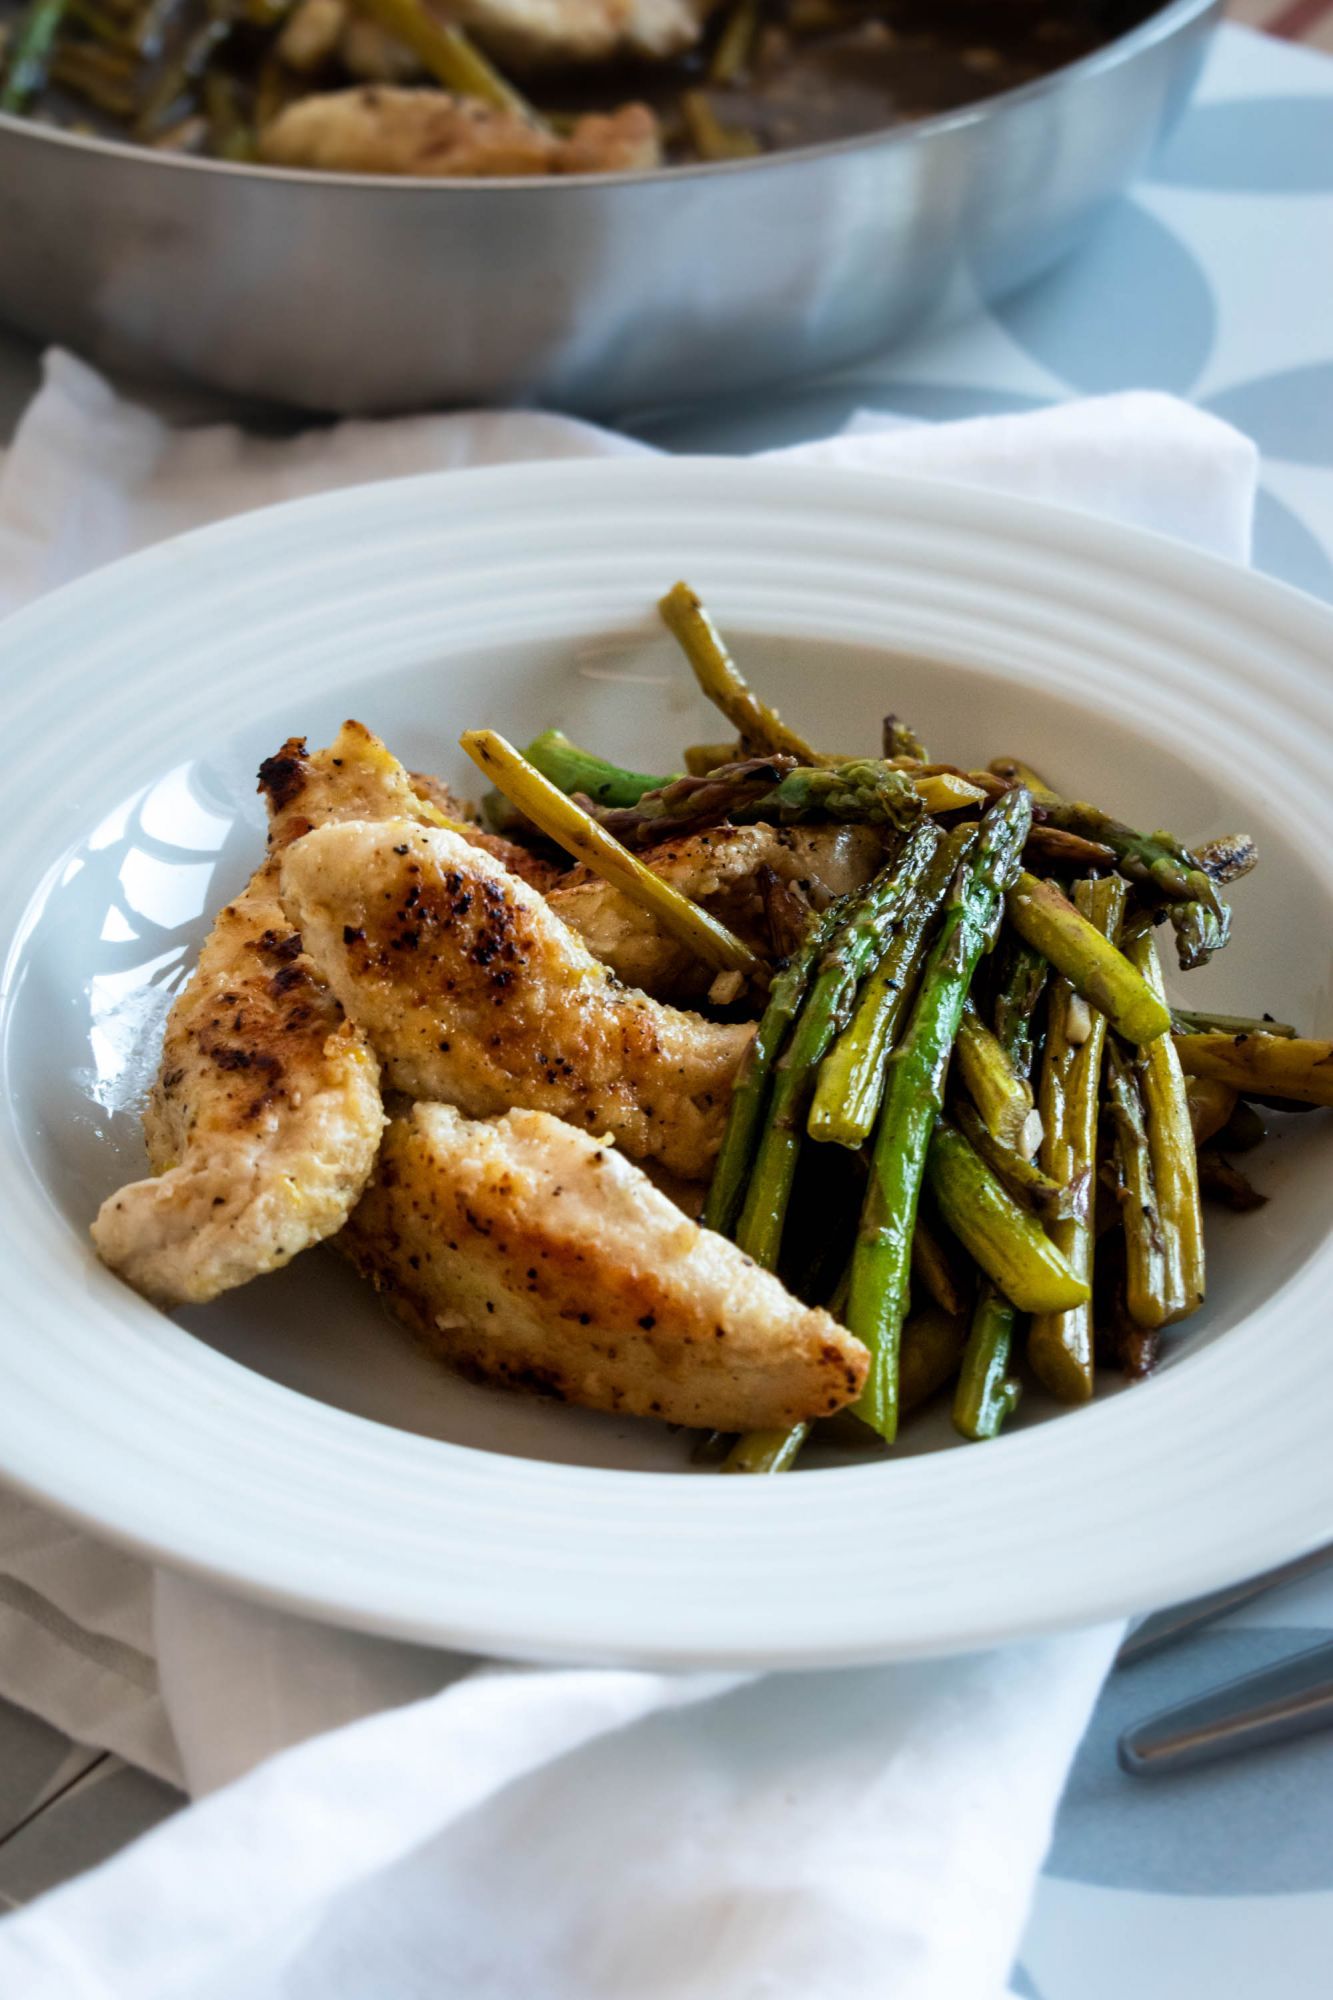 Lemon chicken and asparagus with a garlic pan sauce and crispy chicken served on a plate with a skillet in the background.